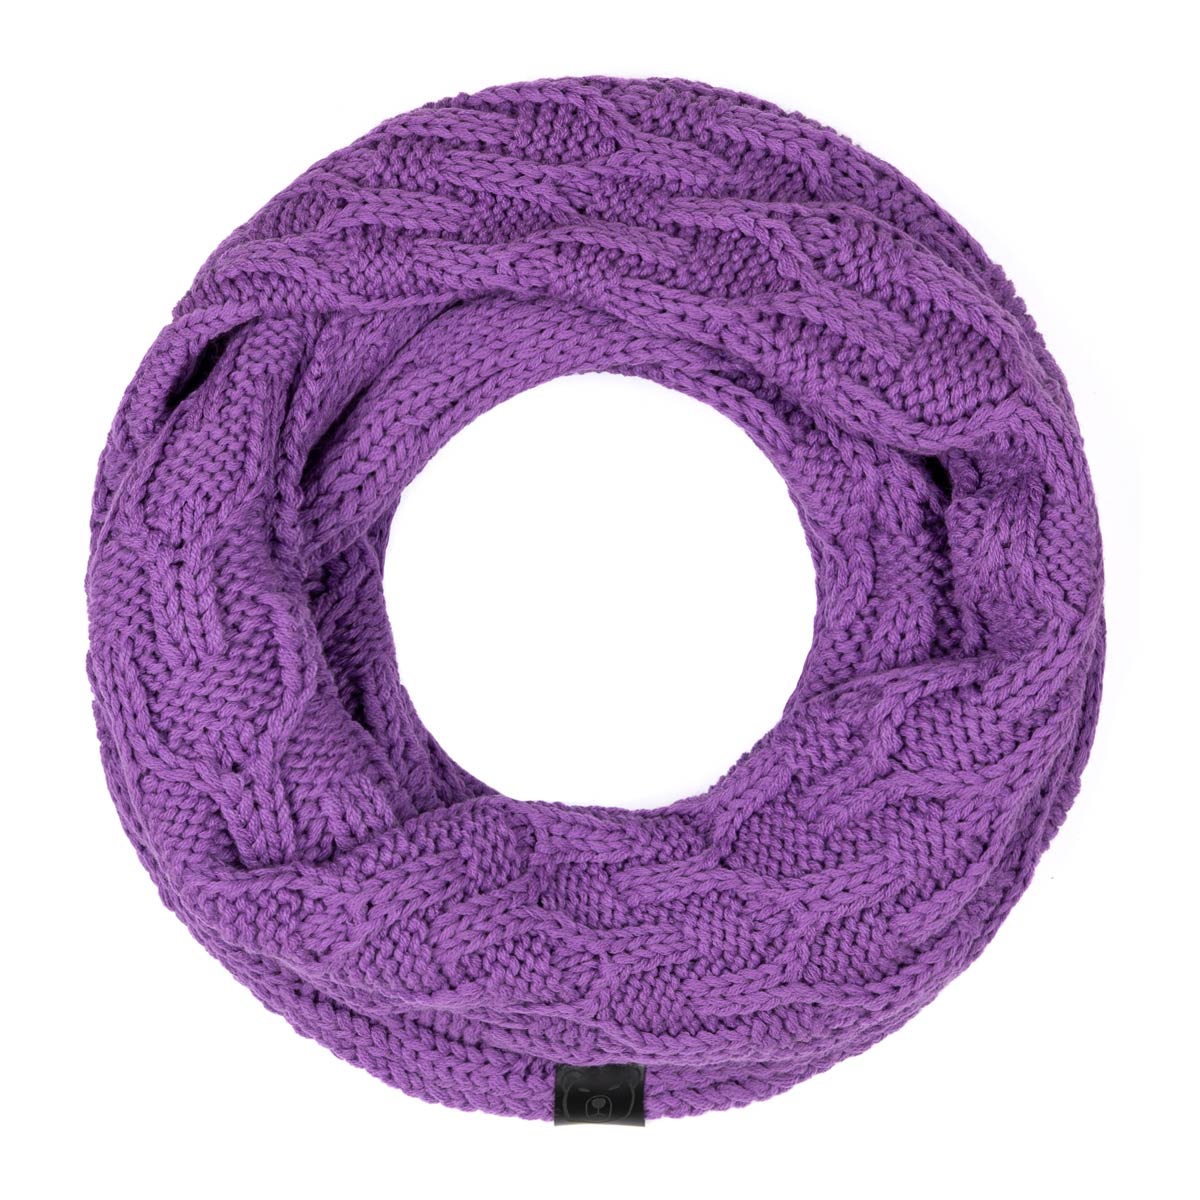 Snood-violet-chaud-made-in-Europe-AT-07071_F12-1--